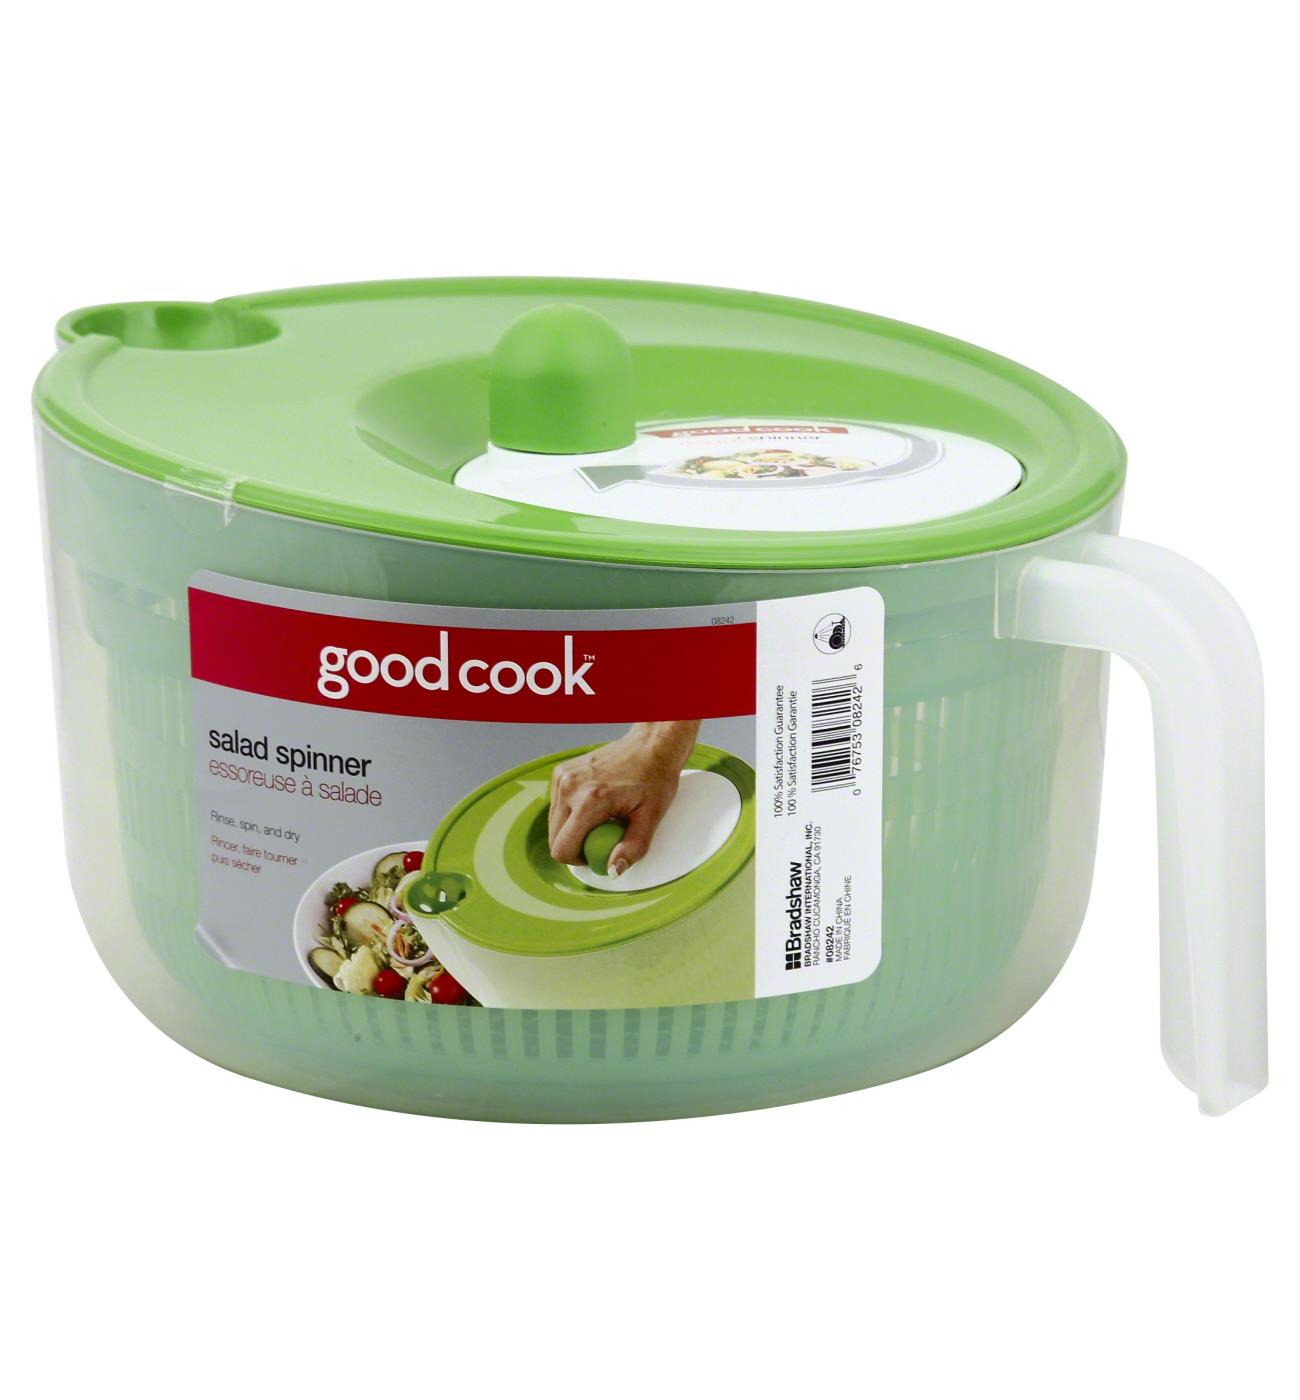 GoodCook Deluxe Salad Spinner; image 1 of 2